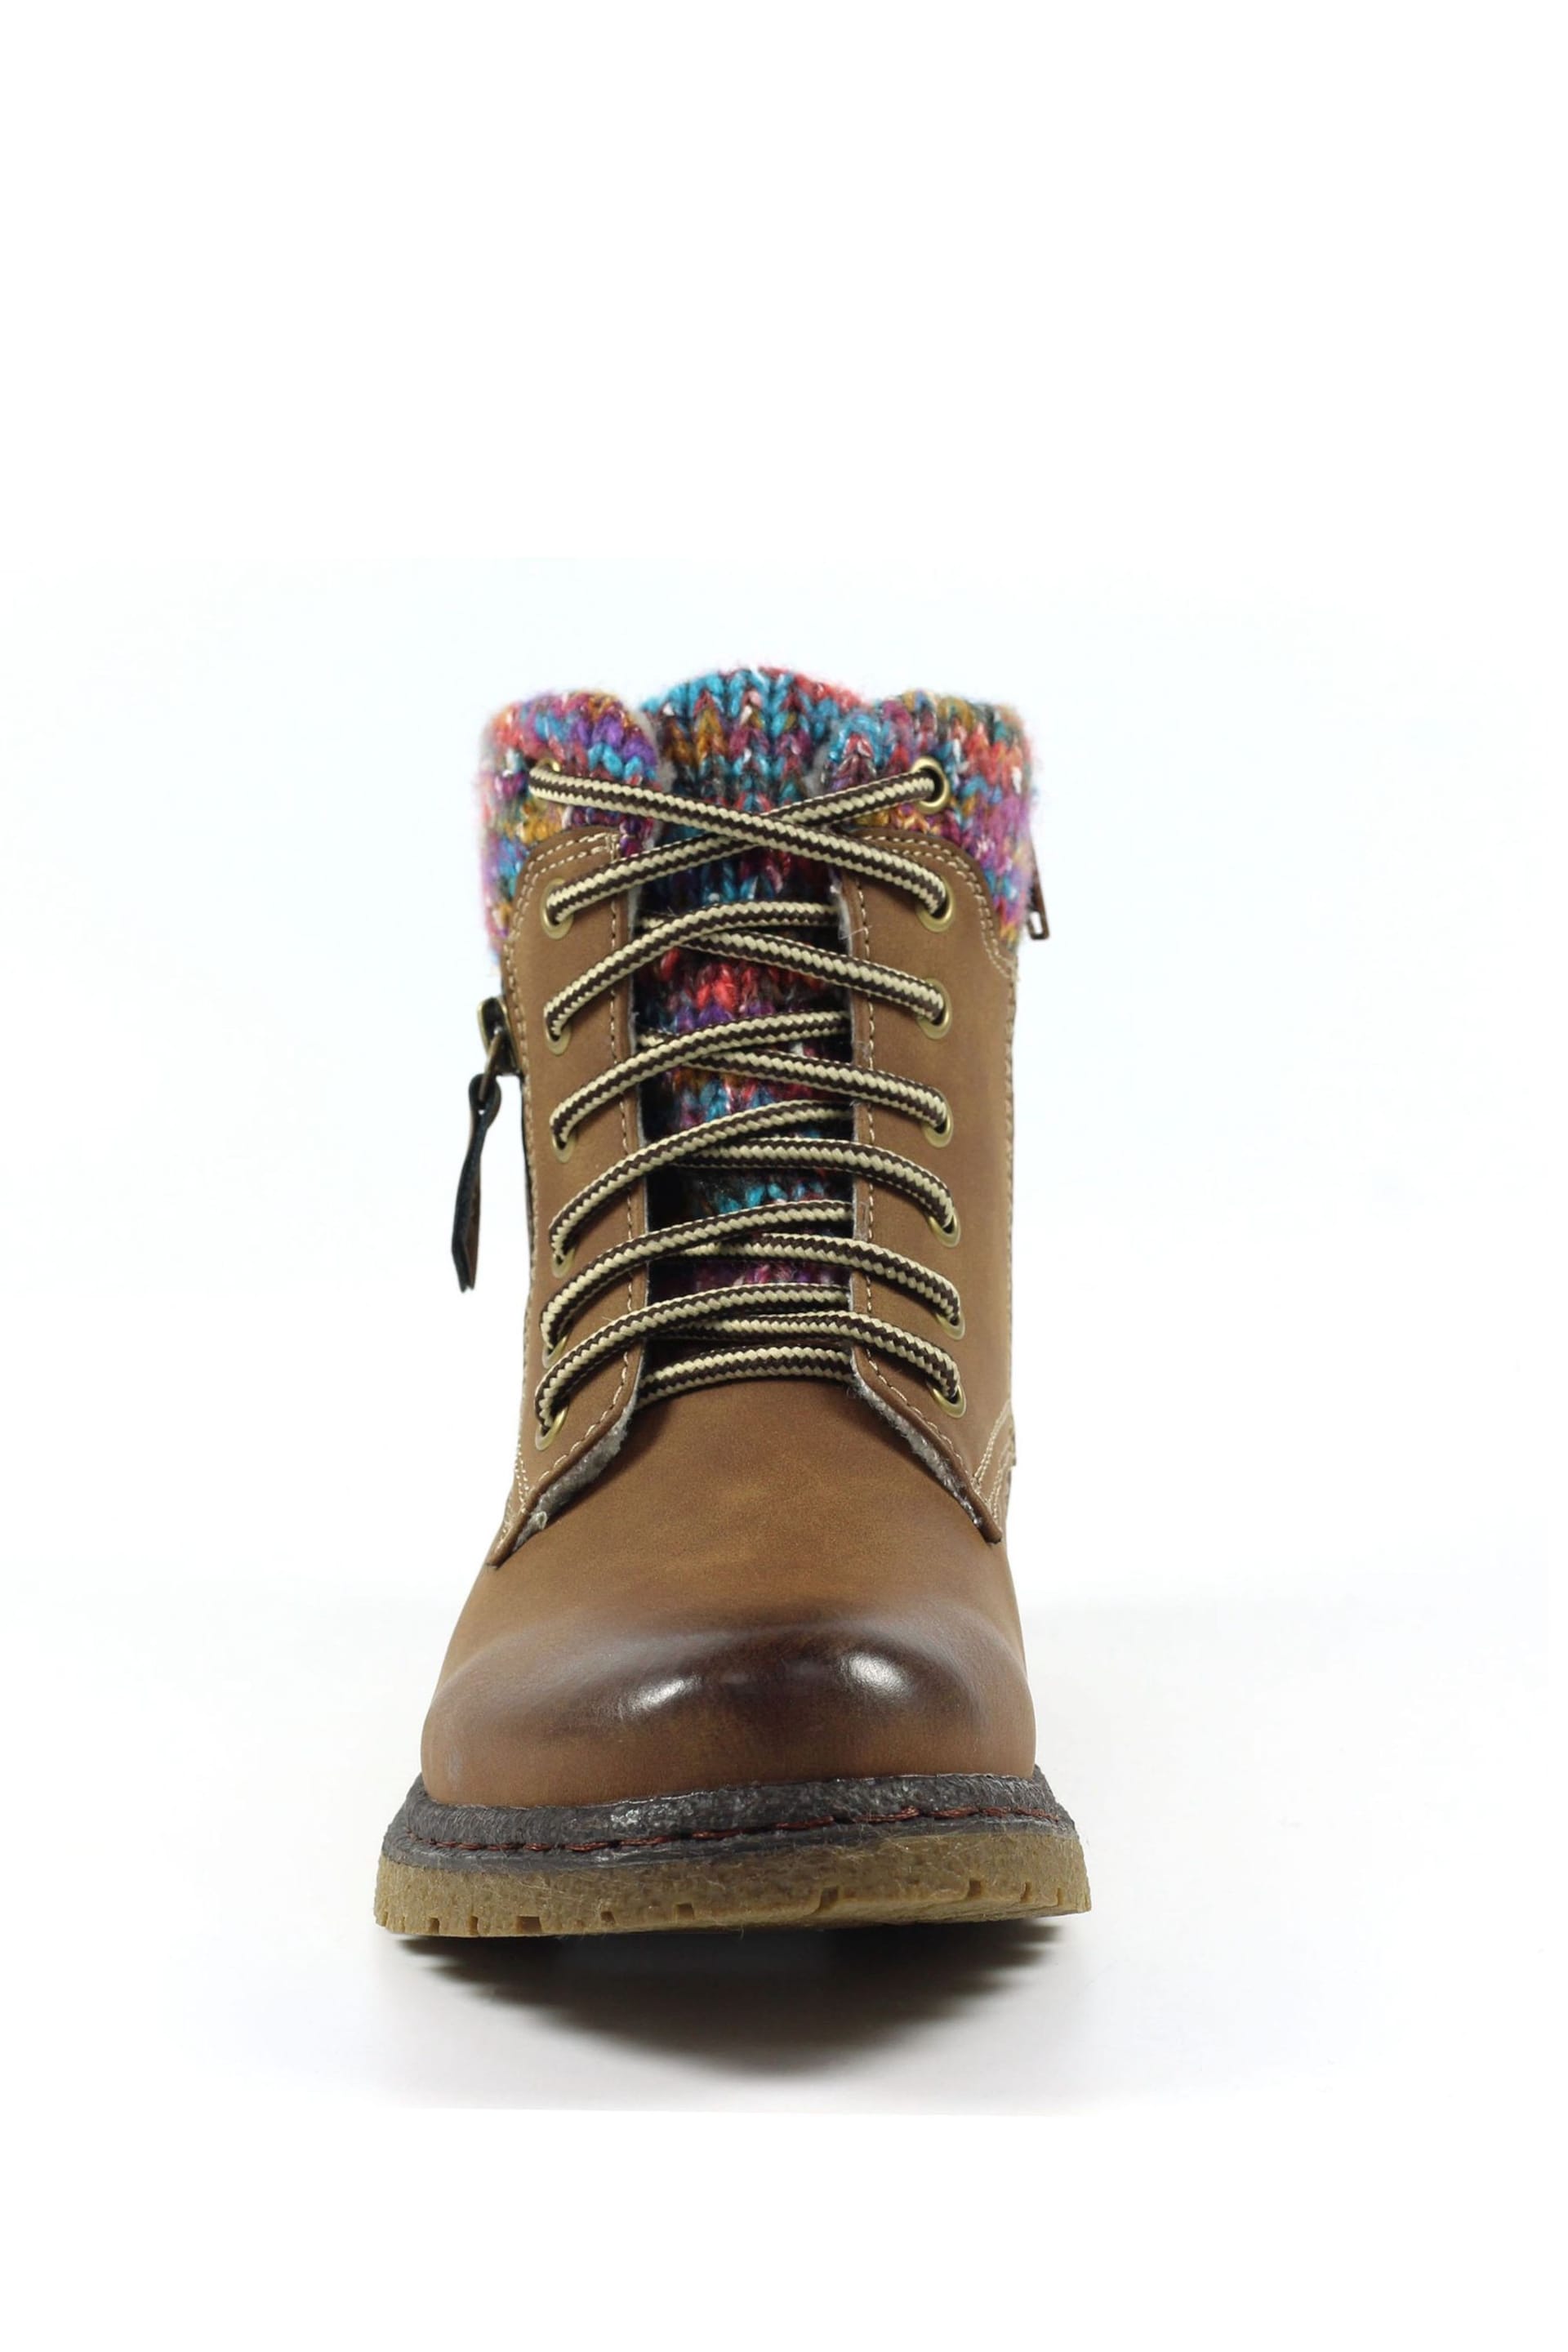 Lunar Jalapeno Waterproof Tan Brown Ankle Boots - Image 3 of 7